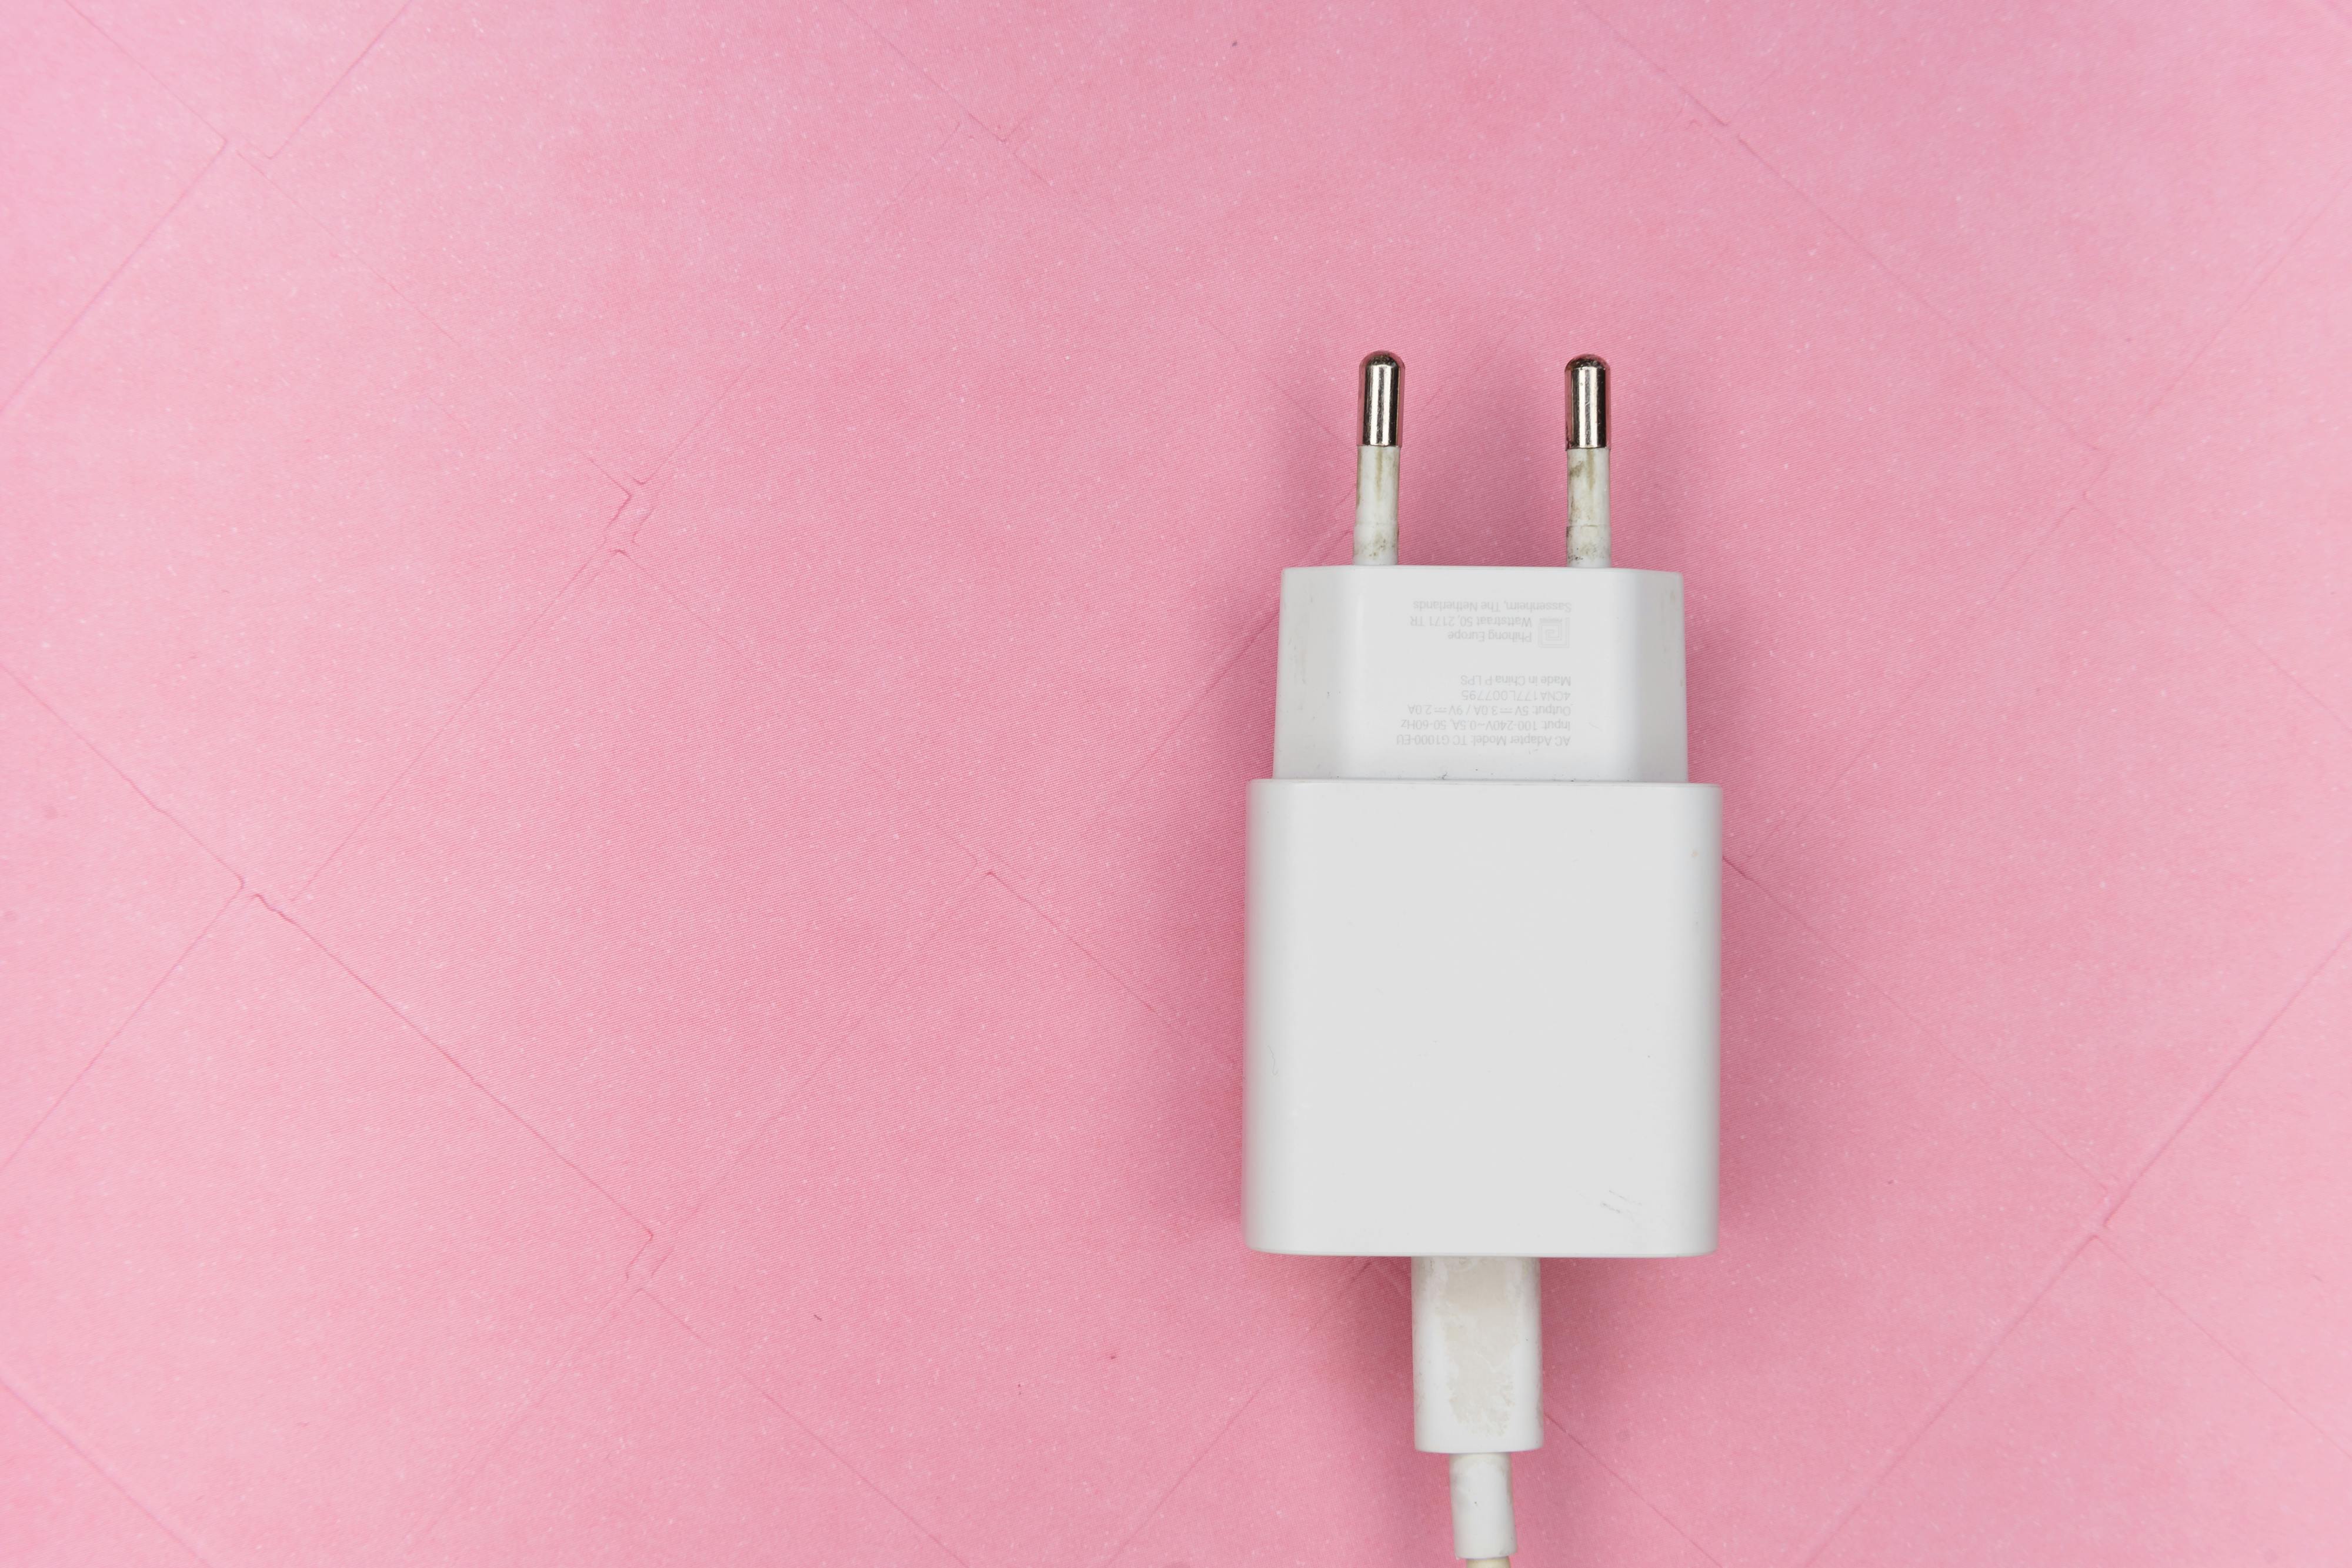 White Adapter on Pink Surface · Free Stock Photo